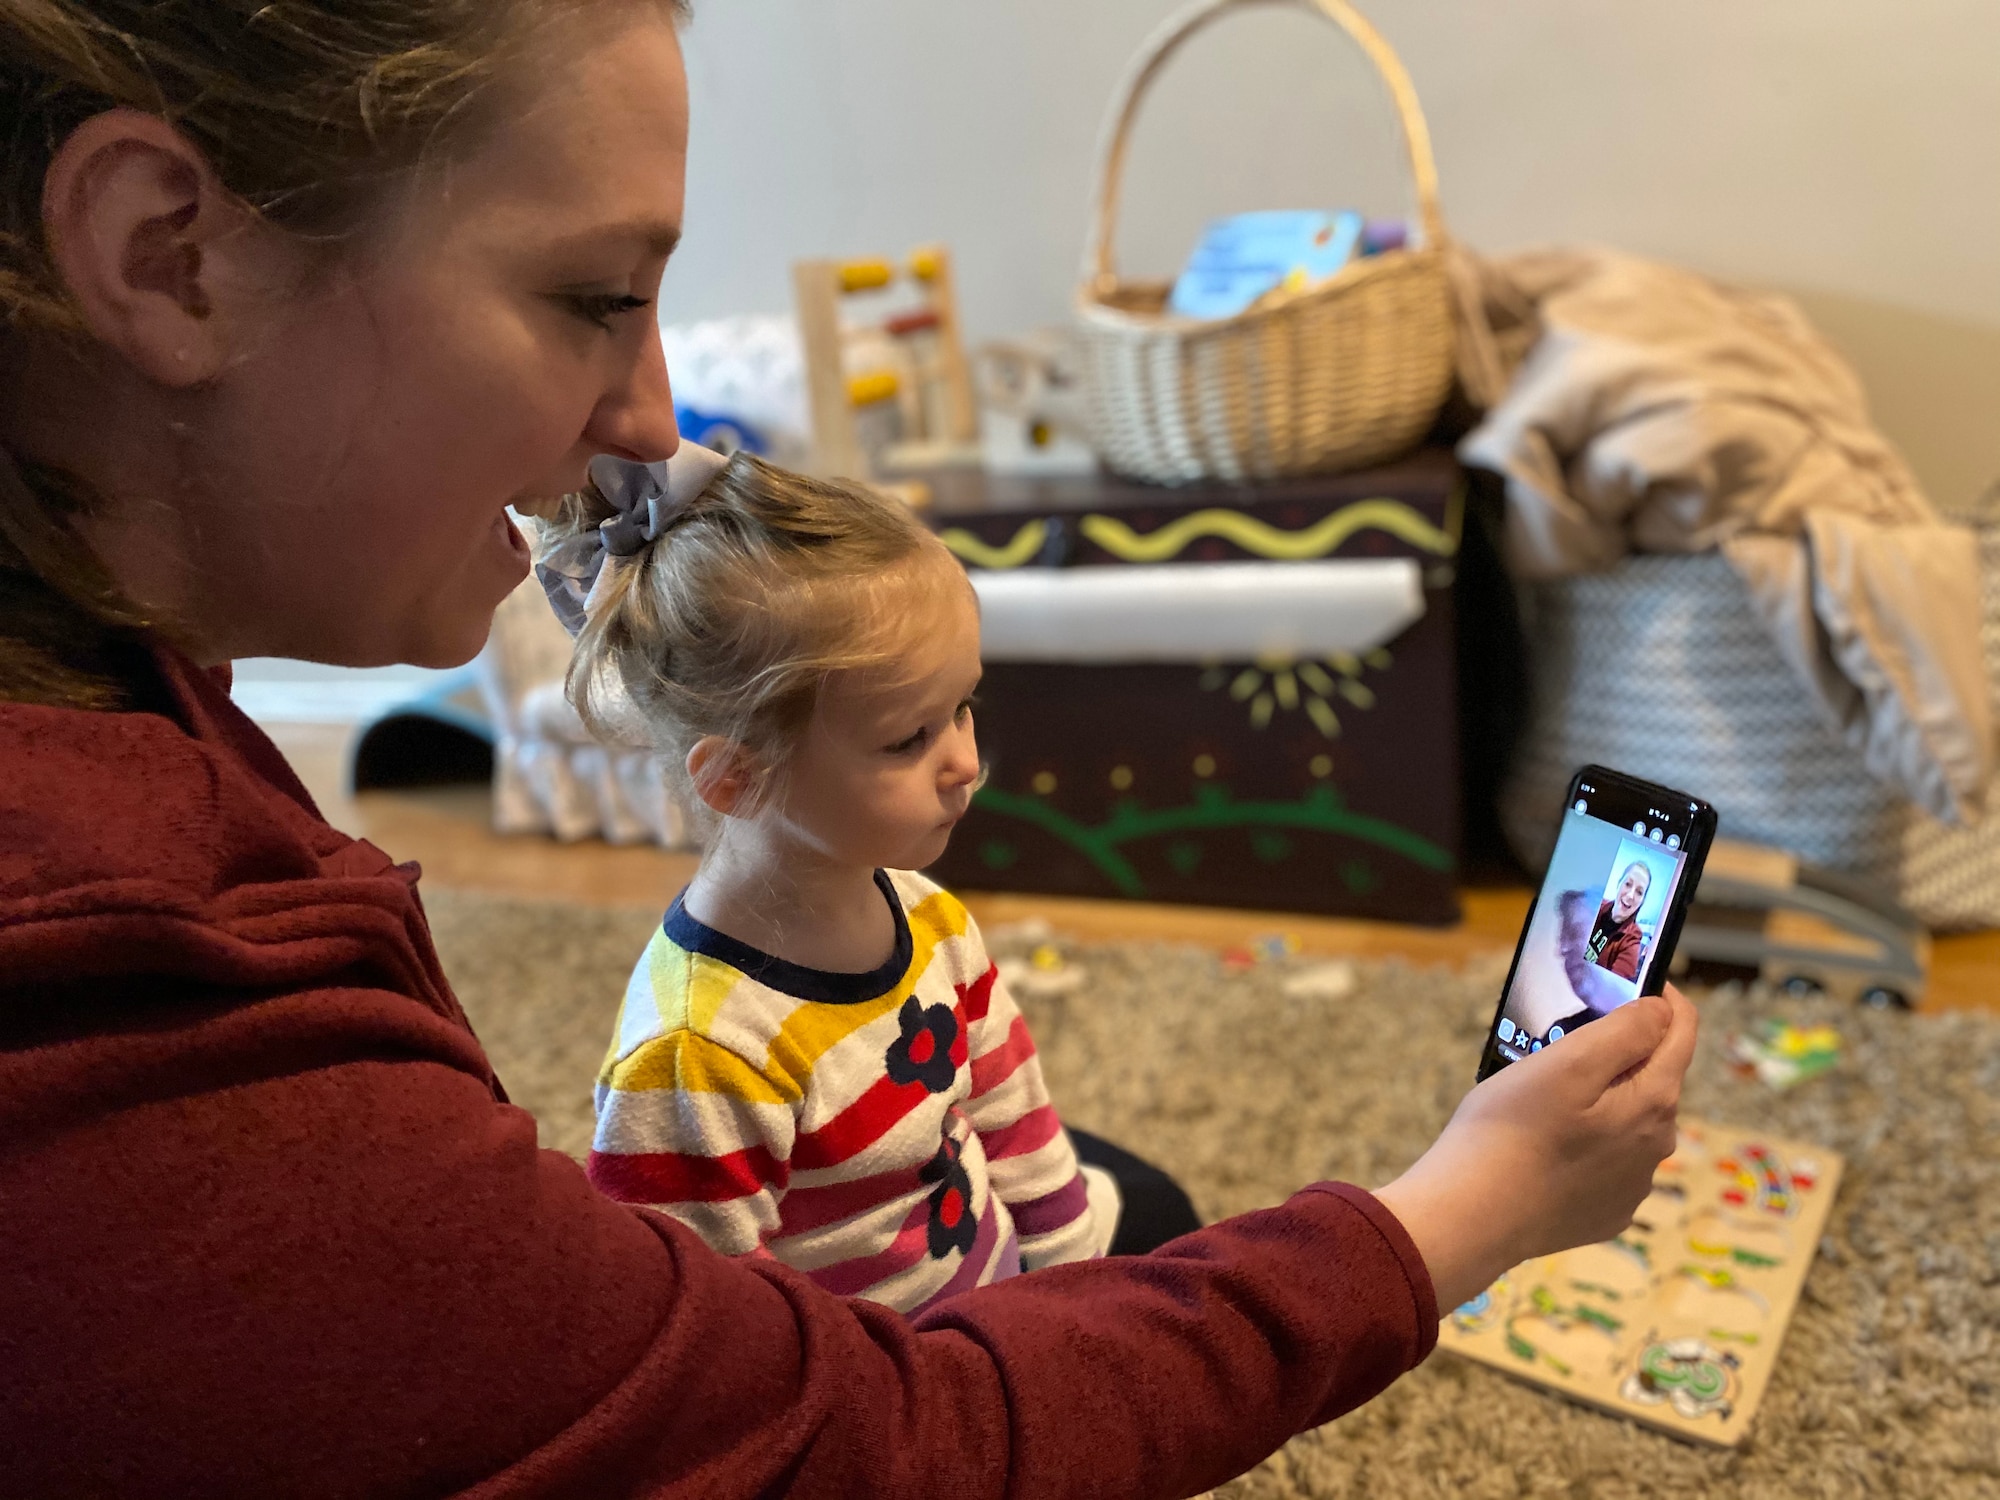 Danielle Frank, a military spouse, uses video conferencing technology to stay in contact with family during the COVID-19 quarantine, Gresham, Oregon, March 27, 2020. Staying connected while practicing social distancing is crucial to the mental well-being of Airmen and their families.